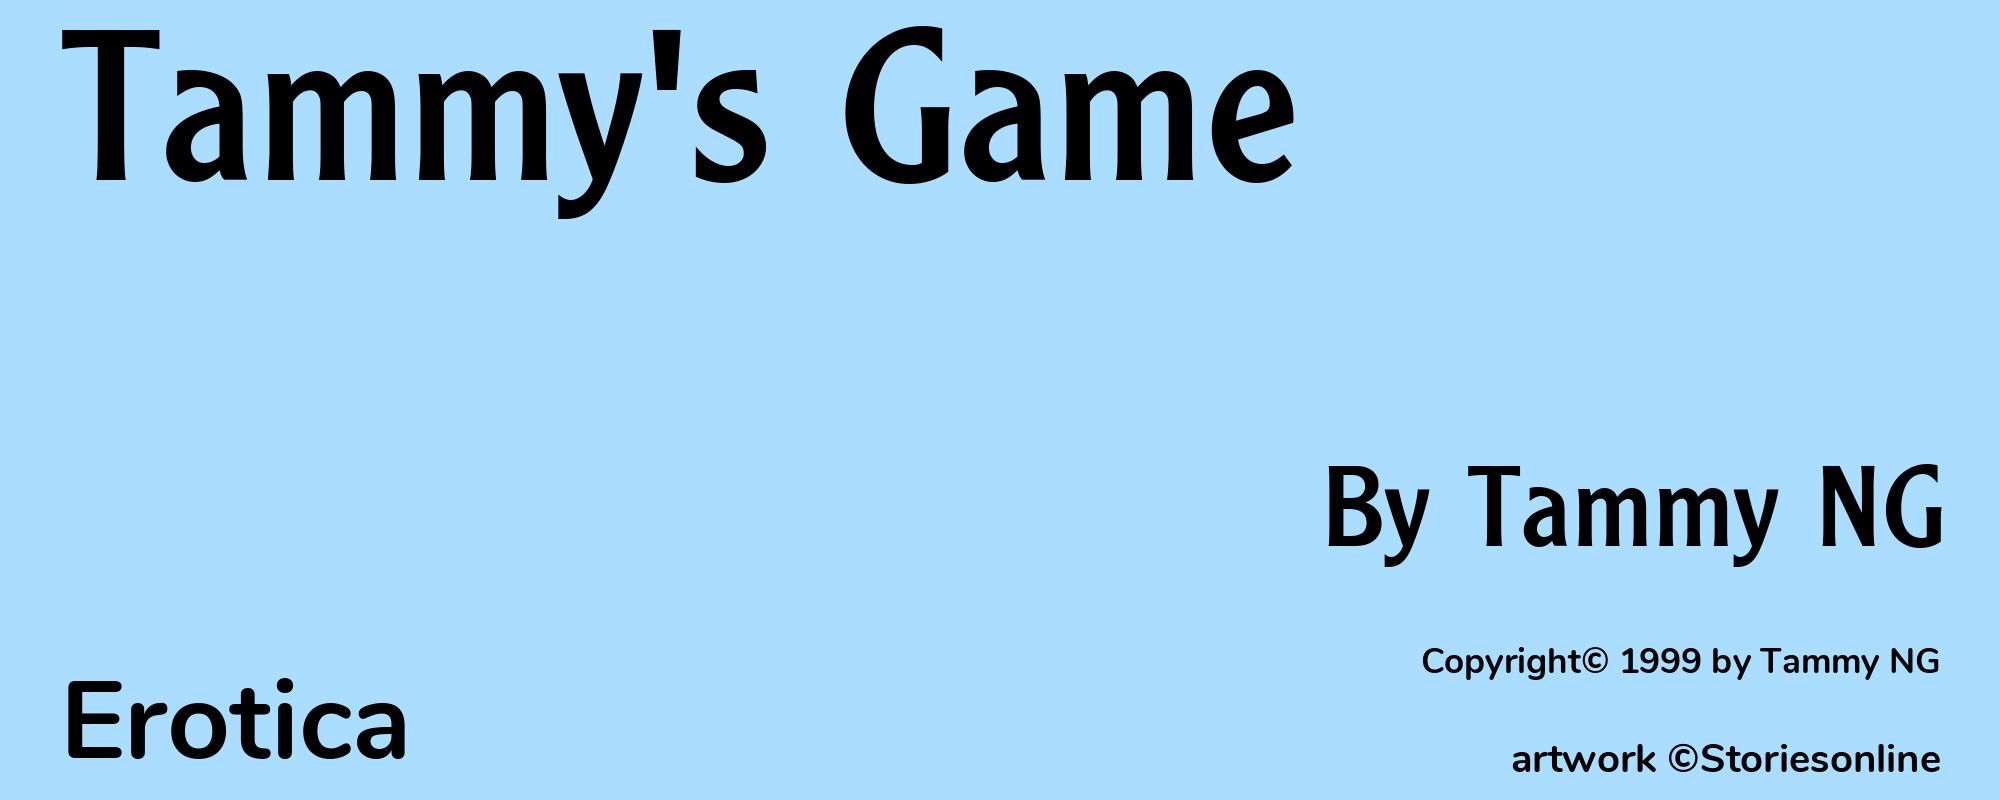 Tammy's Game - Cover